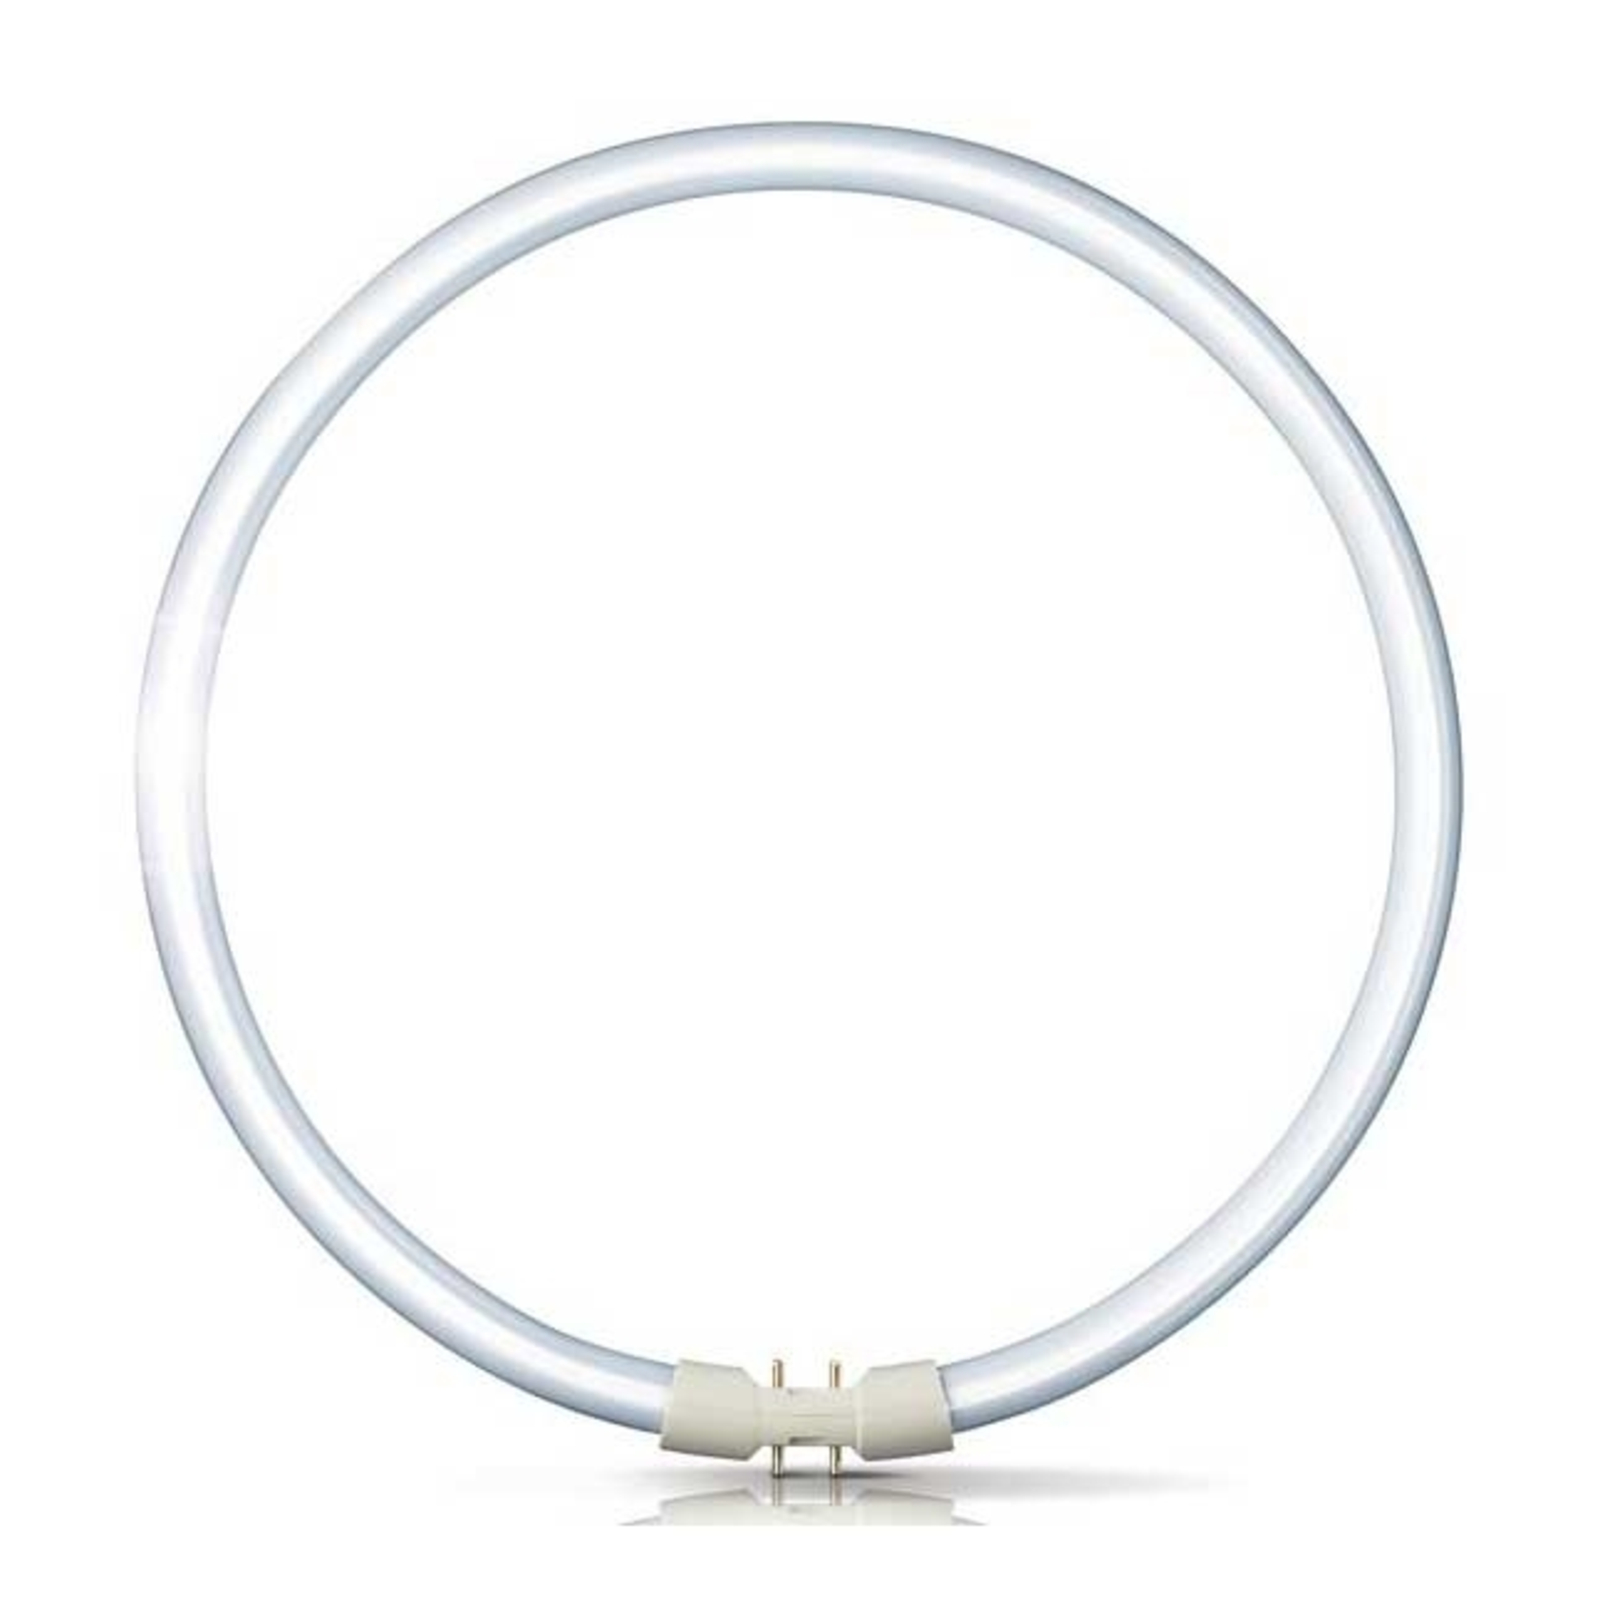 2GX13 22W 840 Ring-Leuchtstofflampe Master TL5